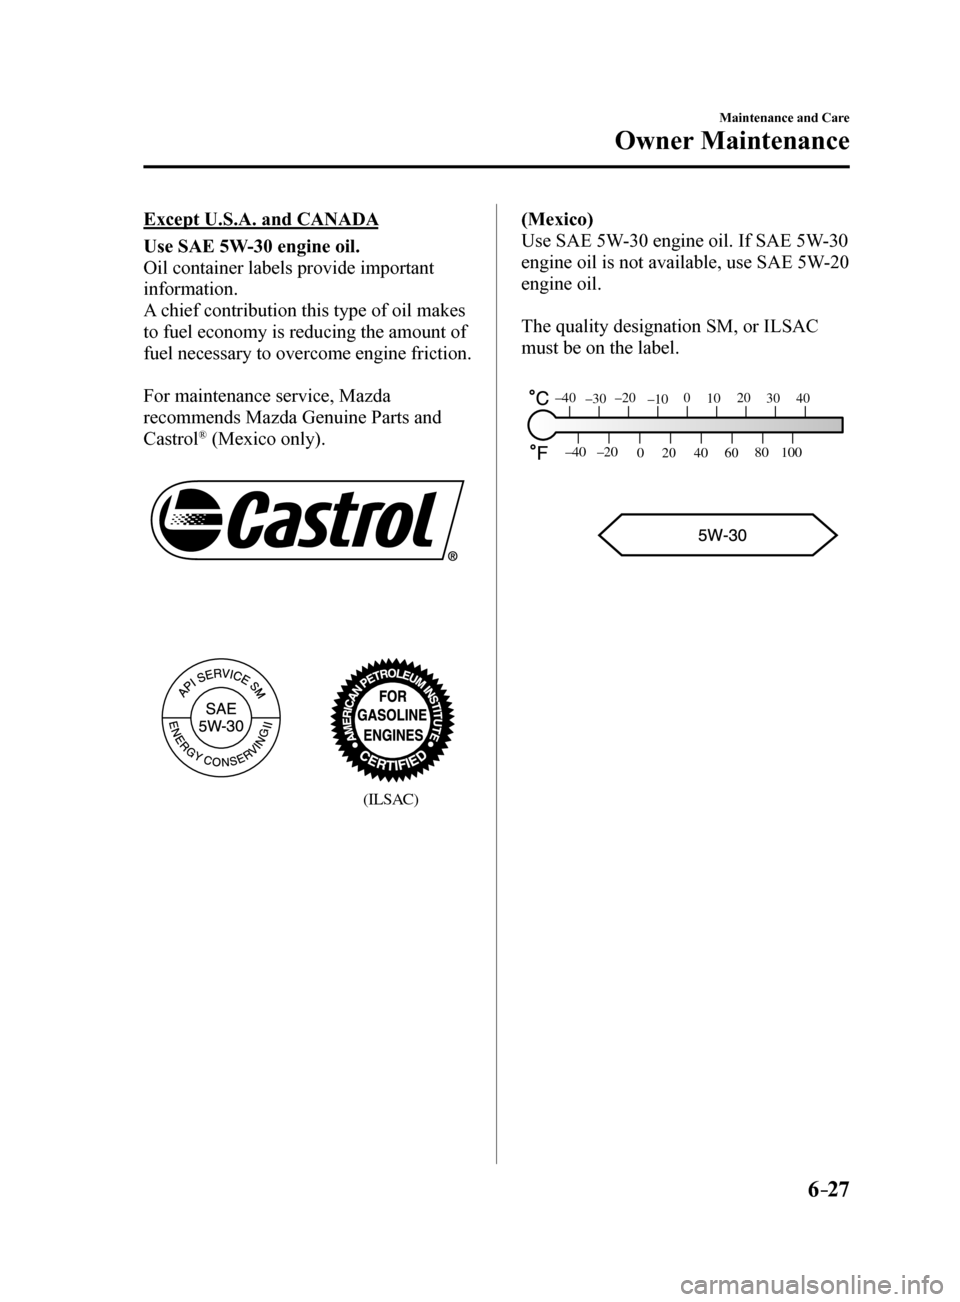 MAZDA MODEL 6 2017  Owners Manual (in English) 6–27
Maintenance and Care
Owner Maintenance
Except U.S.A. and CANADA
Use SAE 5W-30 engine oil.
Oil container labels provide important 
information.
A chief contribution this type of oil makes 
to fu